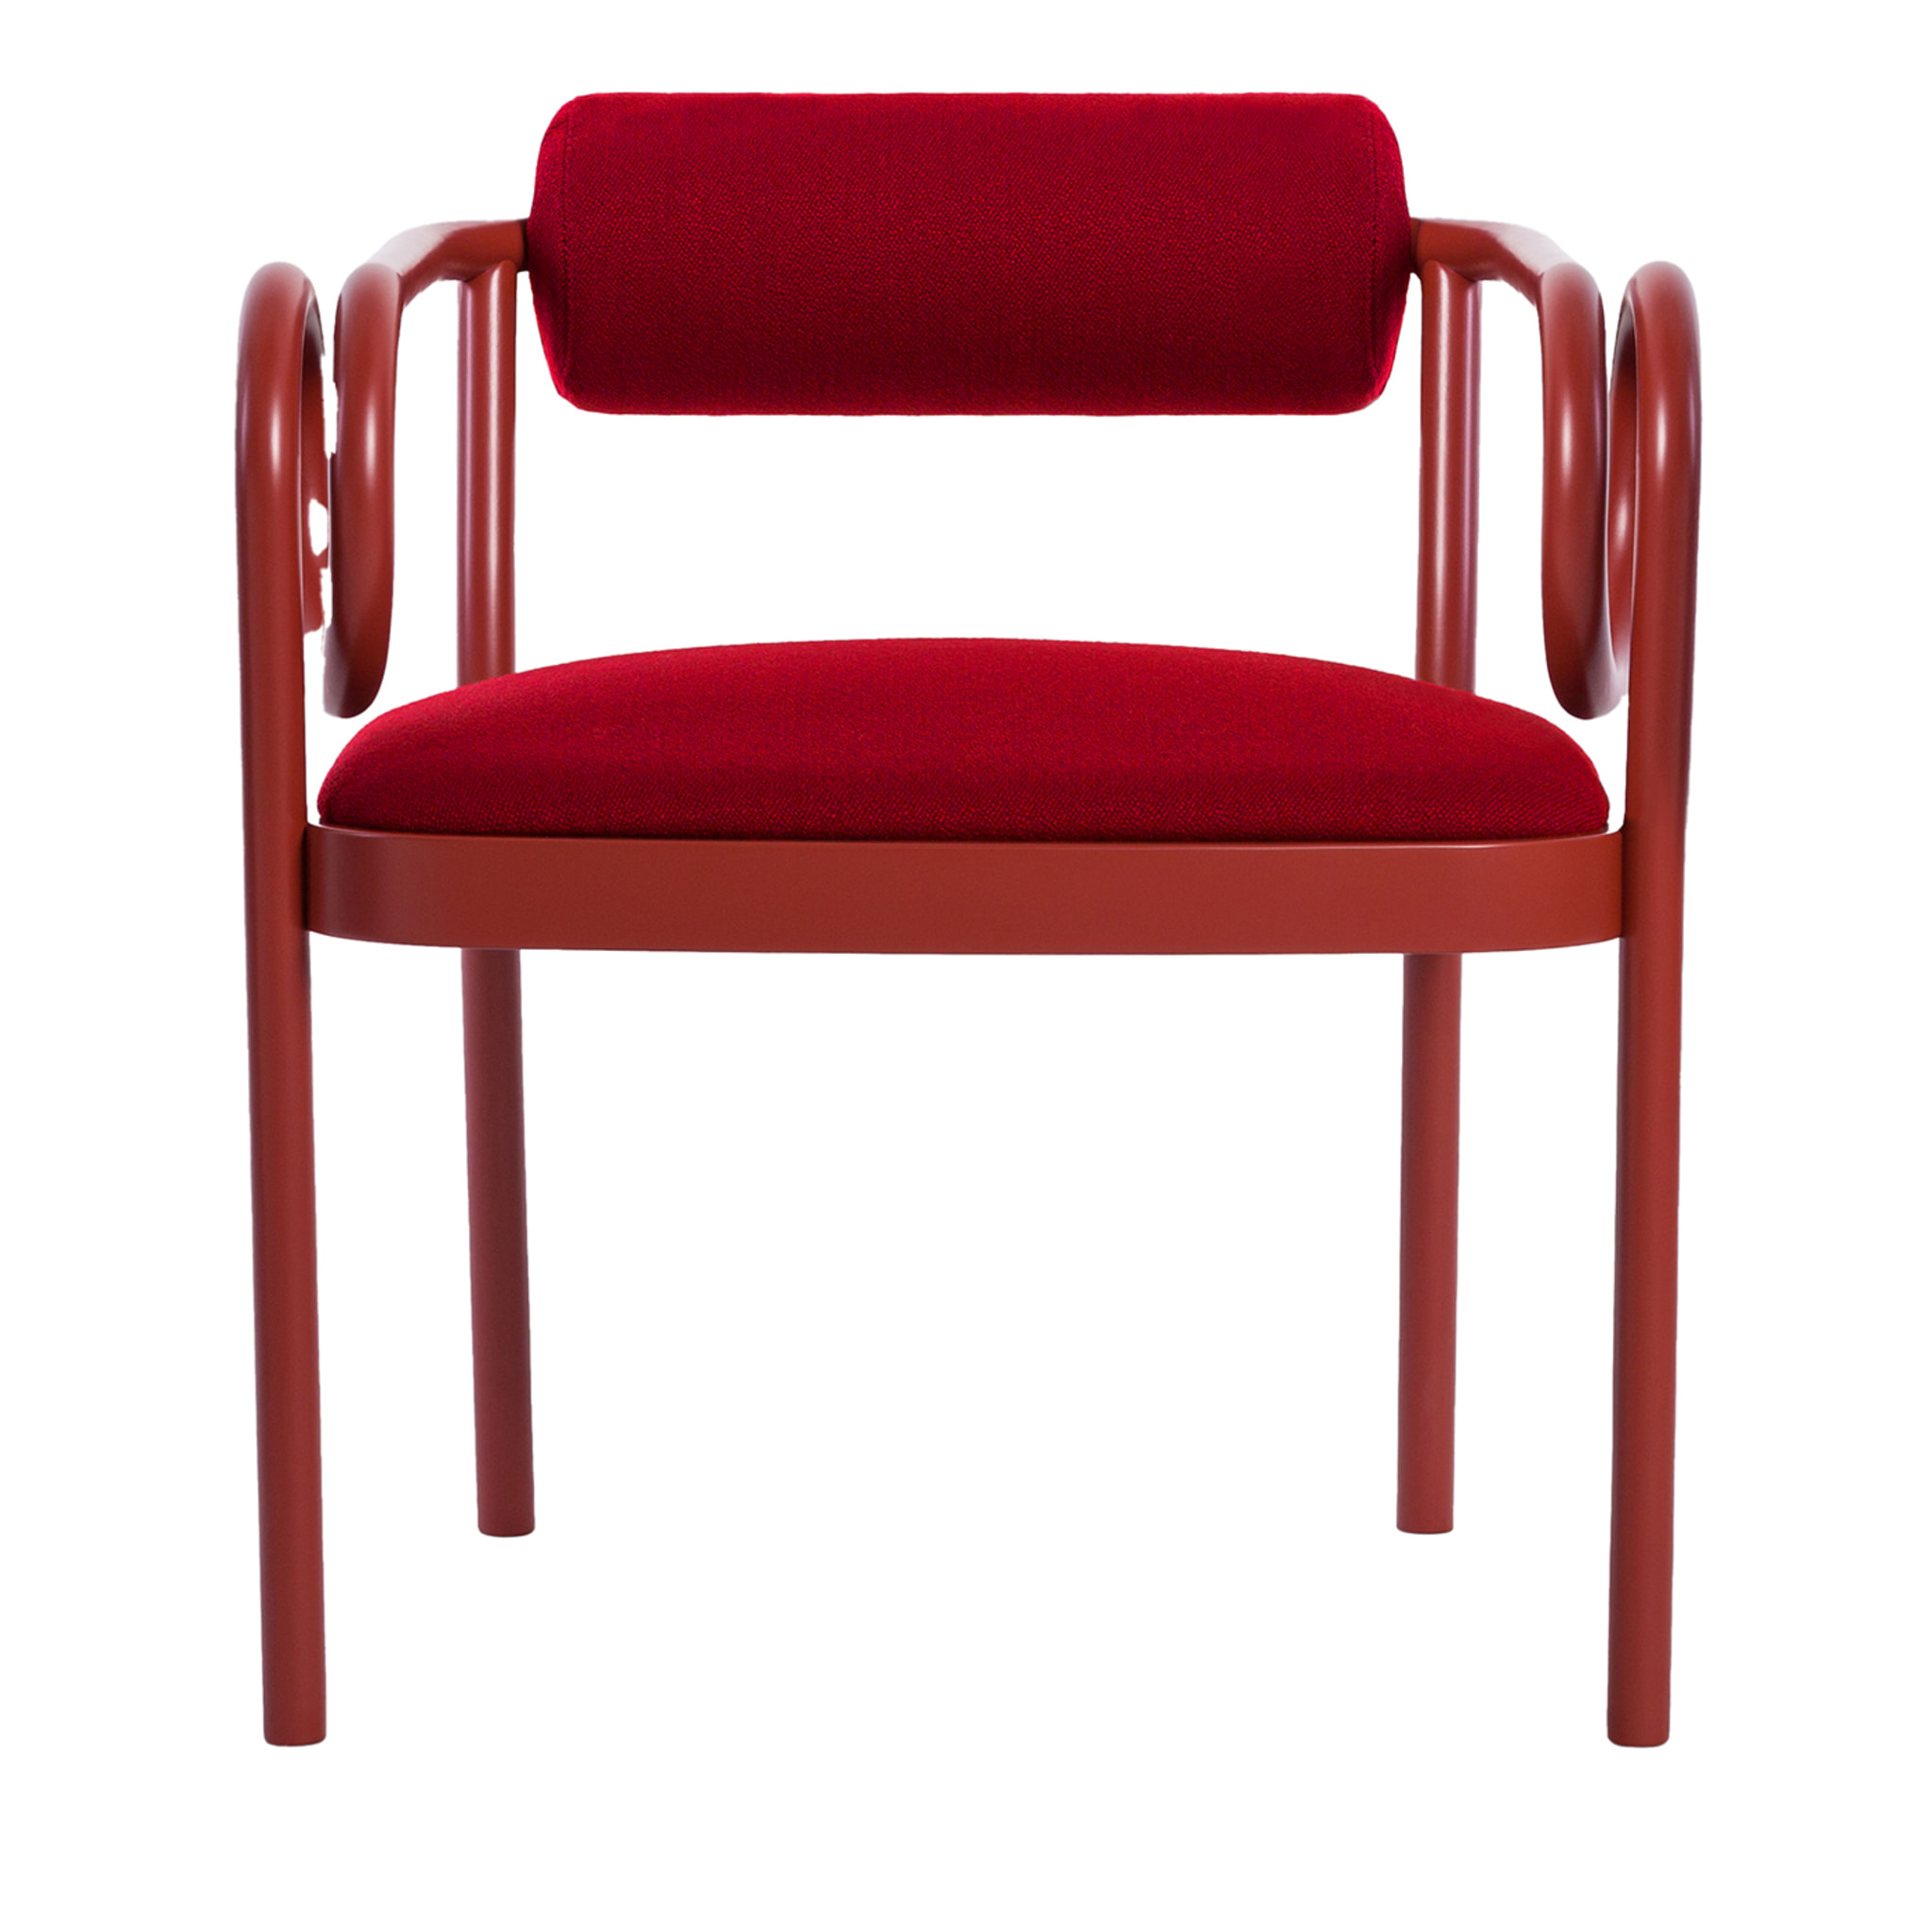 Loop Red Lounge Chair by India Mahdavi - Main view